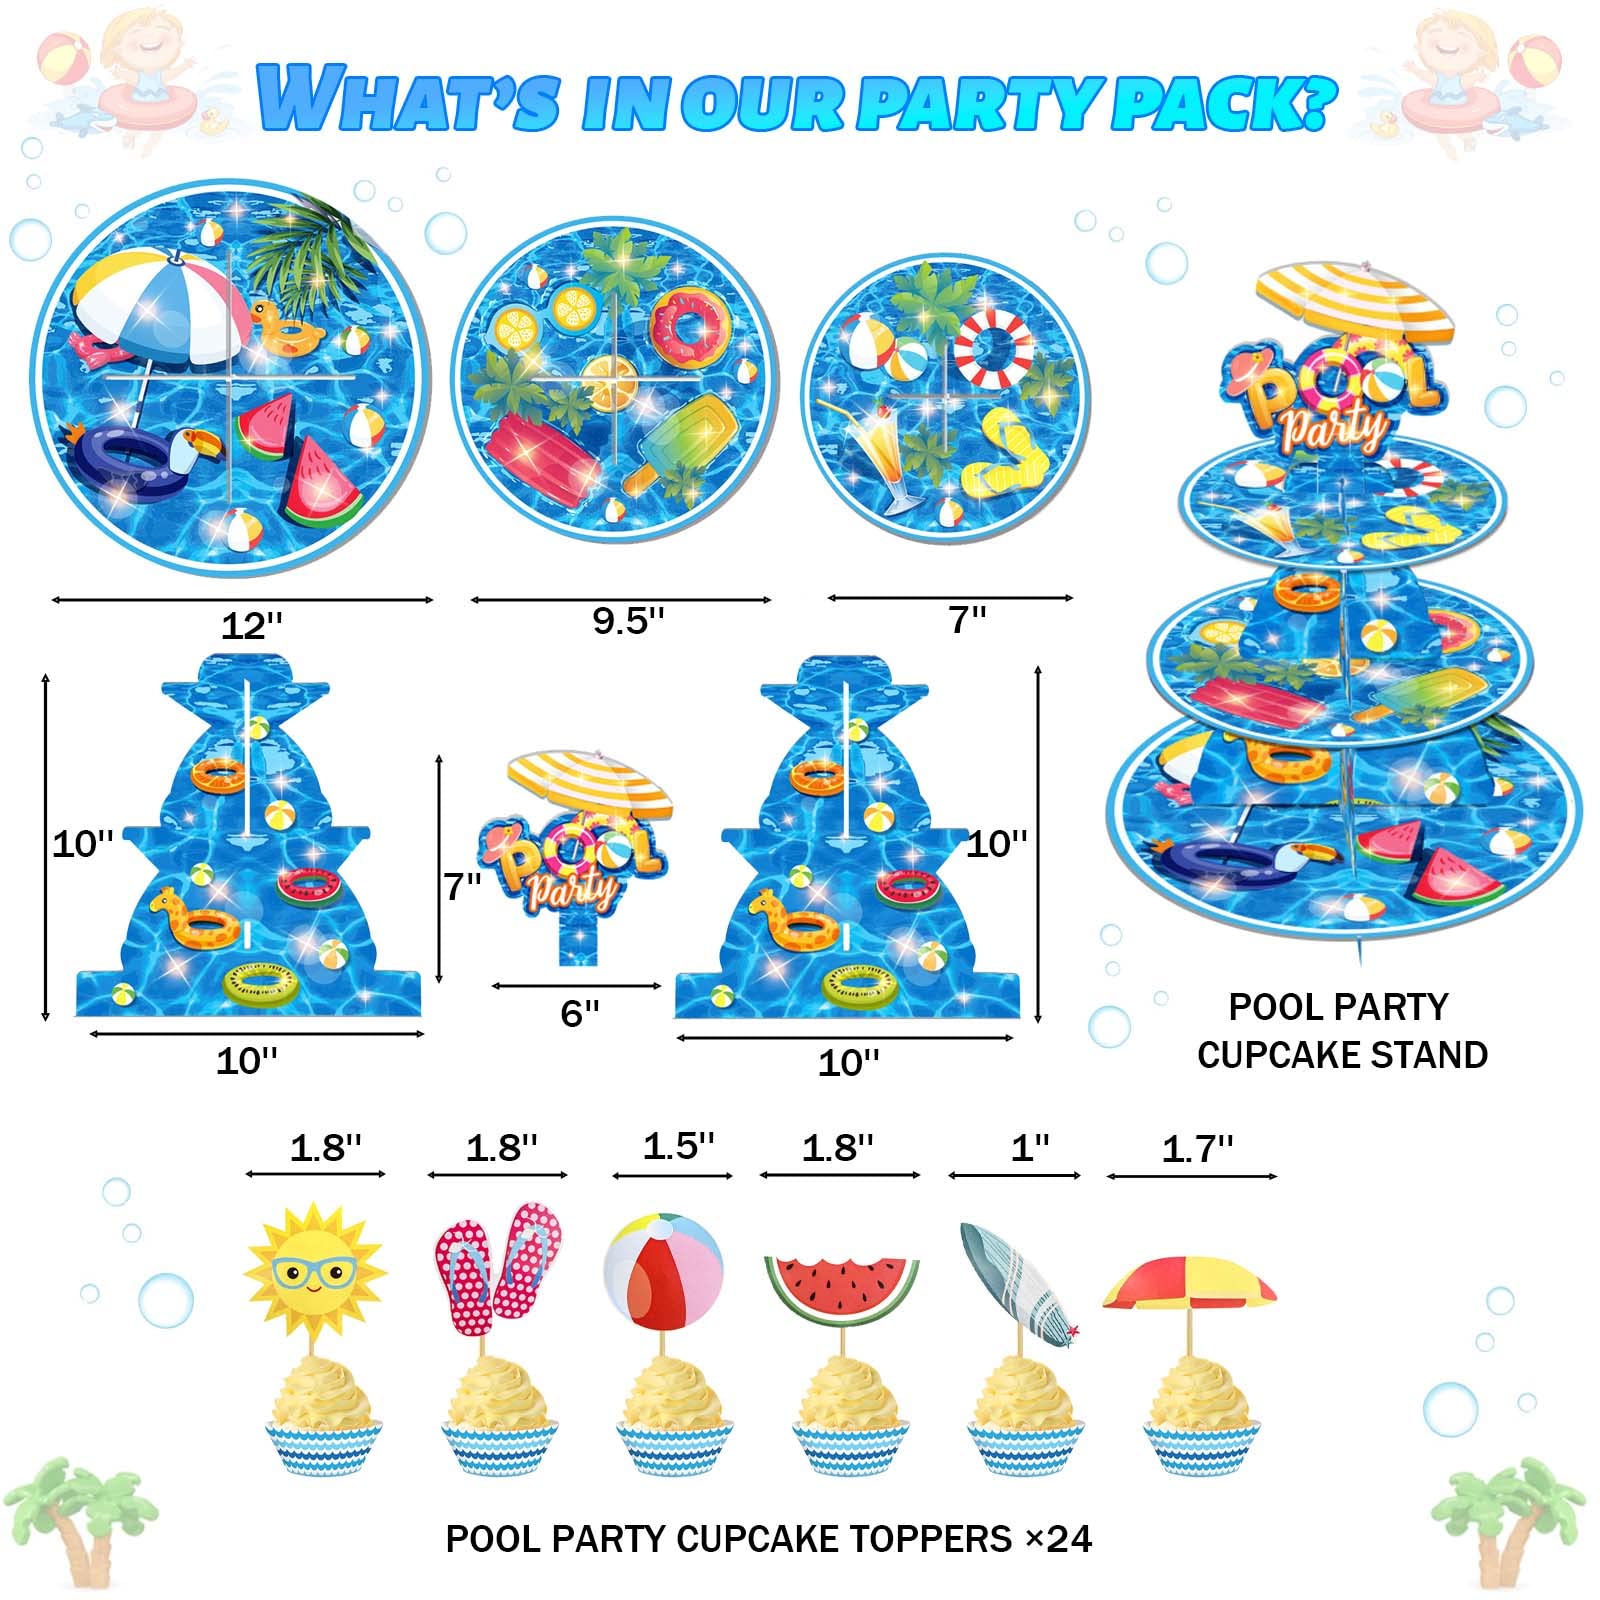 25 PCs Pool Cupcake Stand 3-Tier and Pool Cupcake Topper Set, Fiesec Pool Theme Summer Beach Ball Swimming Hawaii Party Supplies Cardboard Dessert Tower Holder Round Serving Stand Holder